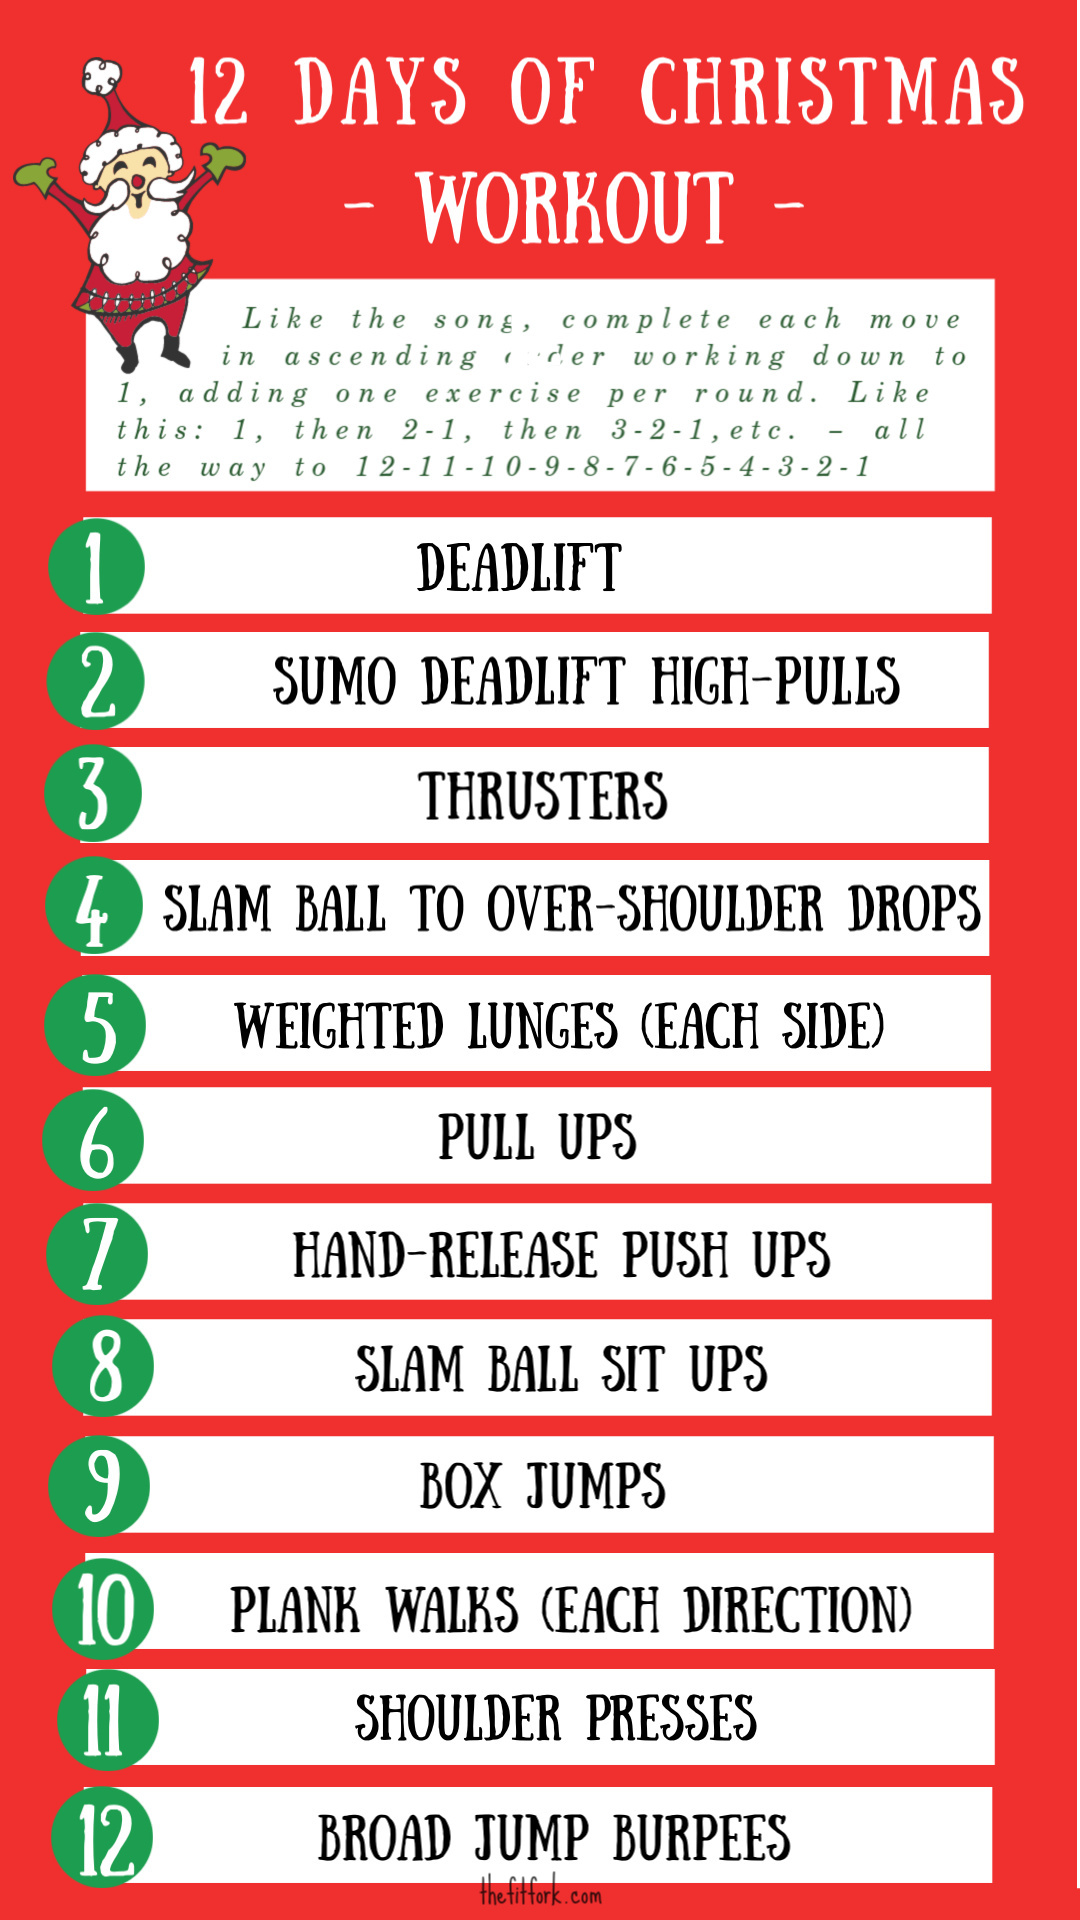 12 Days of Christmas Bodyweight Workout is perfect for a full-body, holiday workout in the gym! 